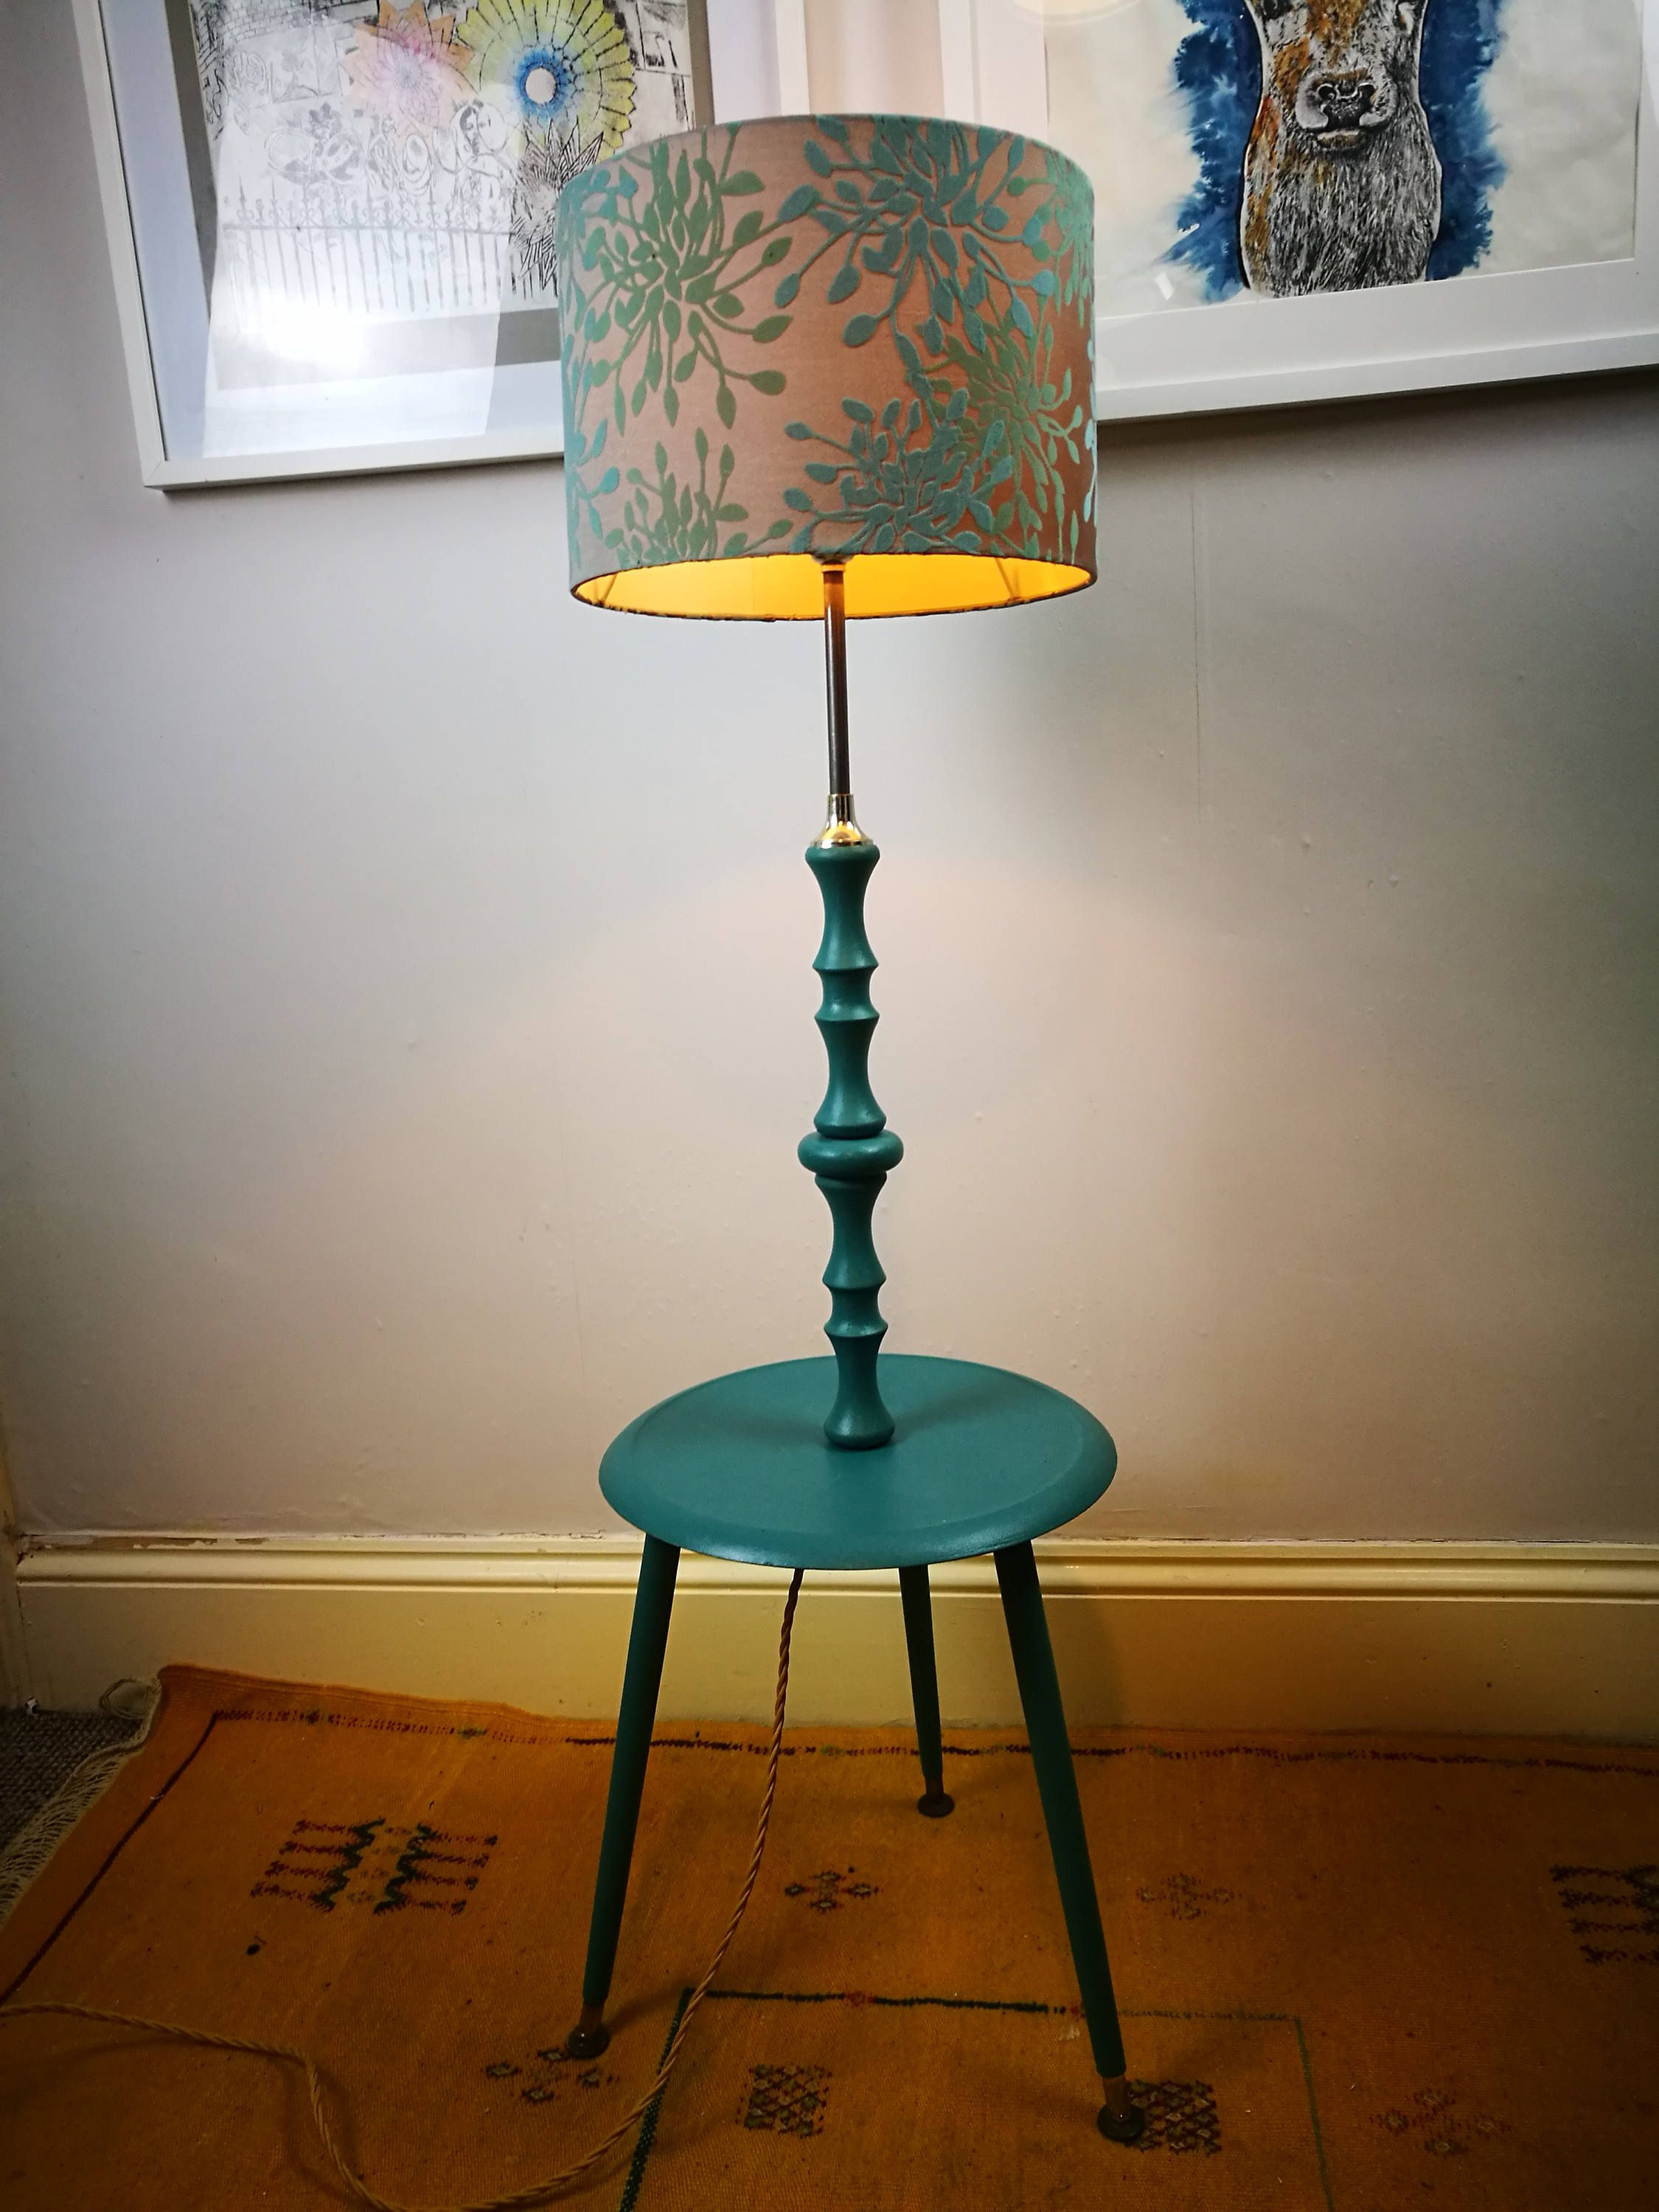 1960s Floor Lamp With Table Madeupsasha On Etsy for size 2250 X 3000